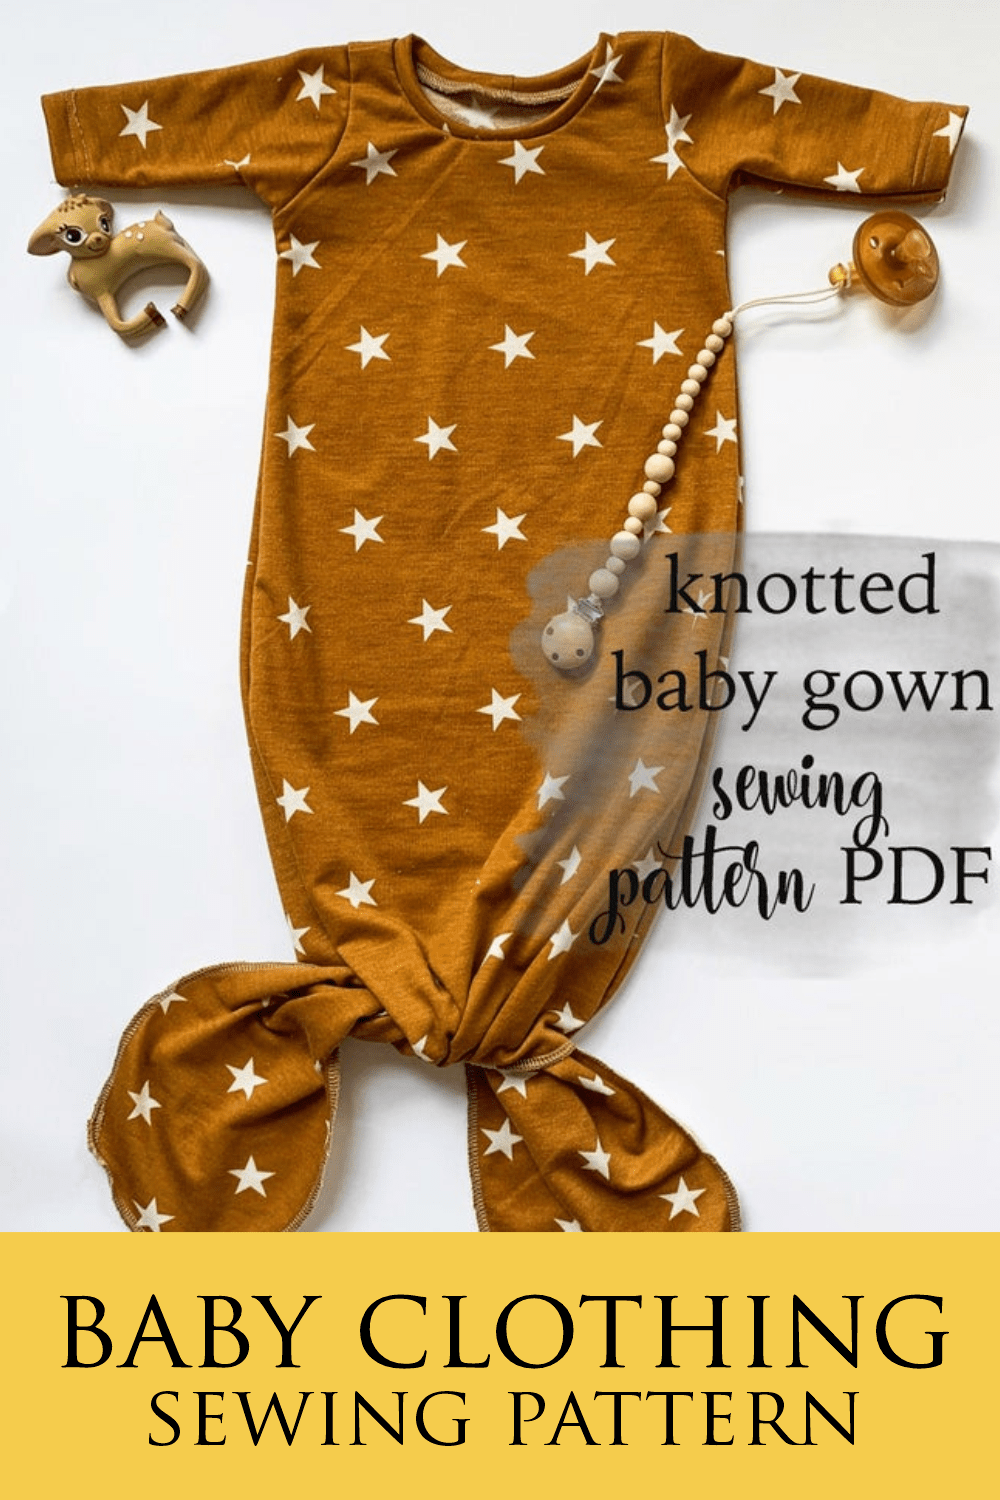 Knotted Baby Gown Pattern | Make a Baby Knotted Sleeper - Knotted Baby Gown Pattern | Make a Baby Knotted Sleeper -   17 diy Baby accessories ideas